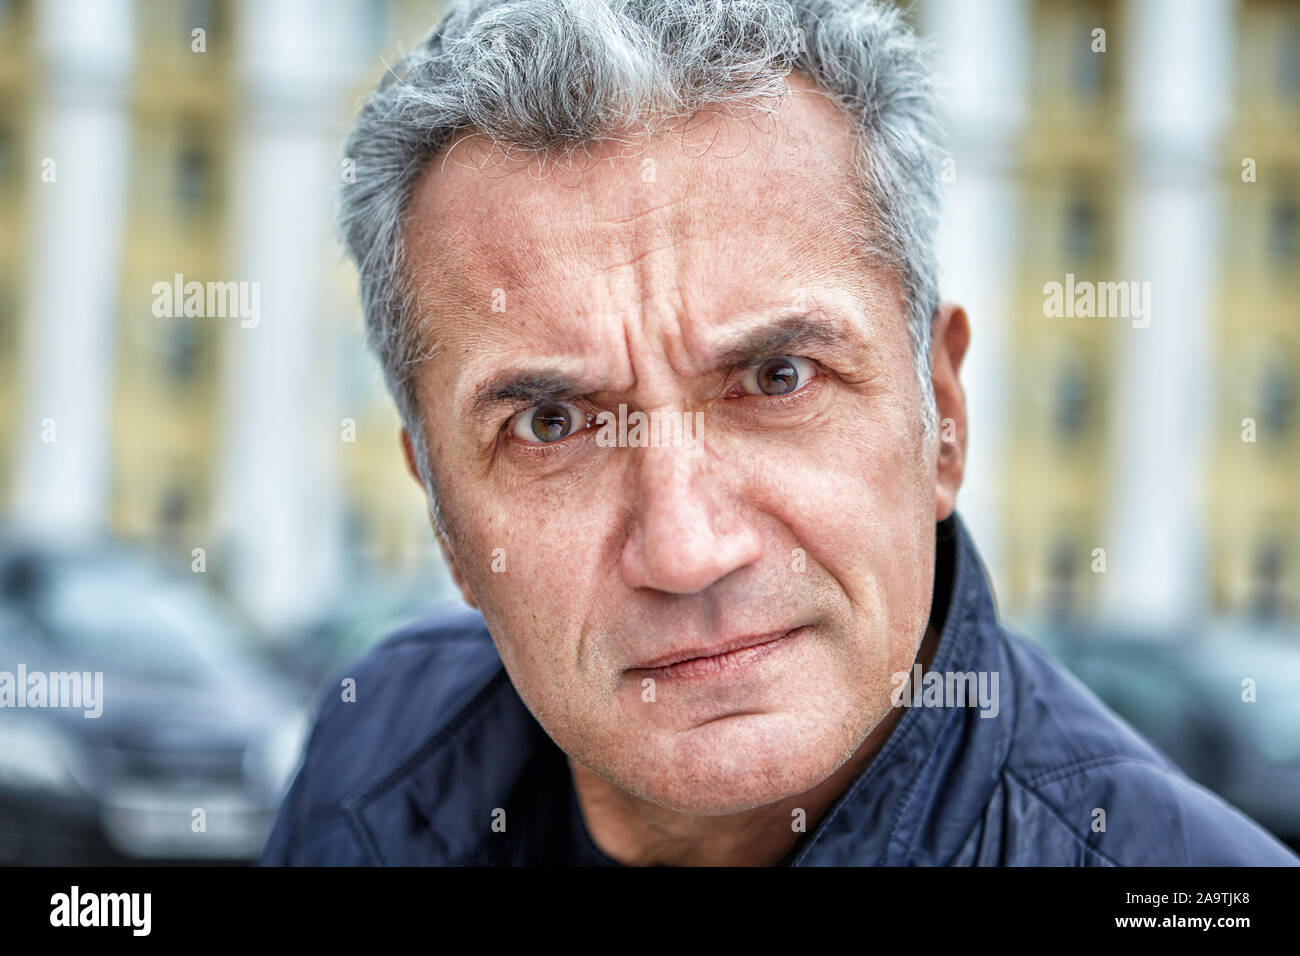 A well-groomed man with the appearance of an official and an angry reproachful look with irritation looks into the photographers lens against the back Stock Photo